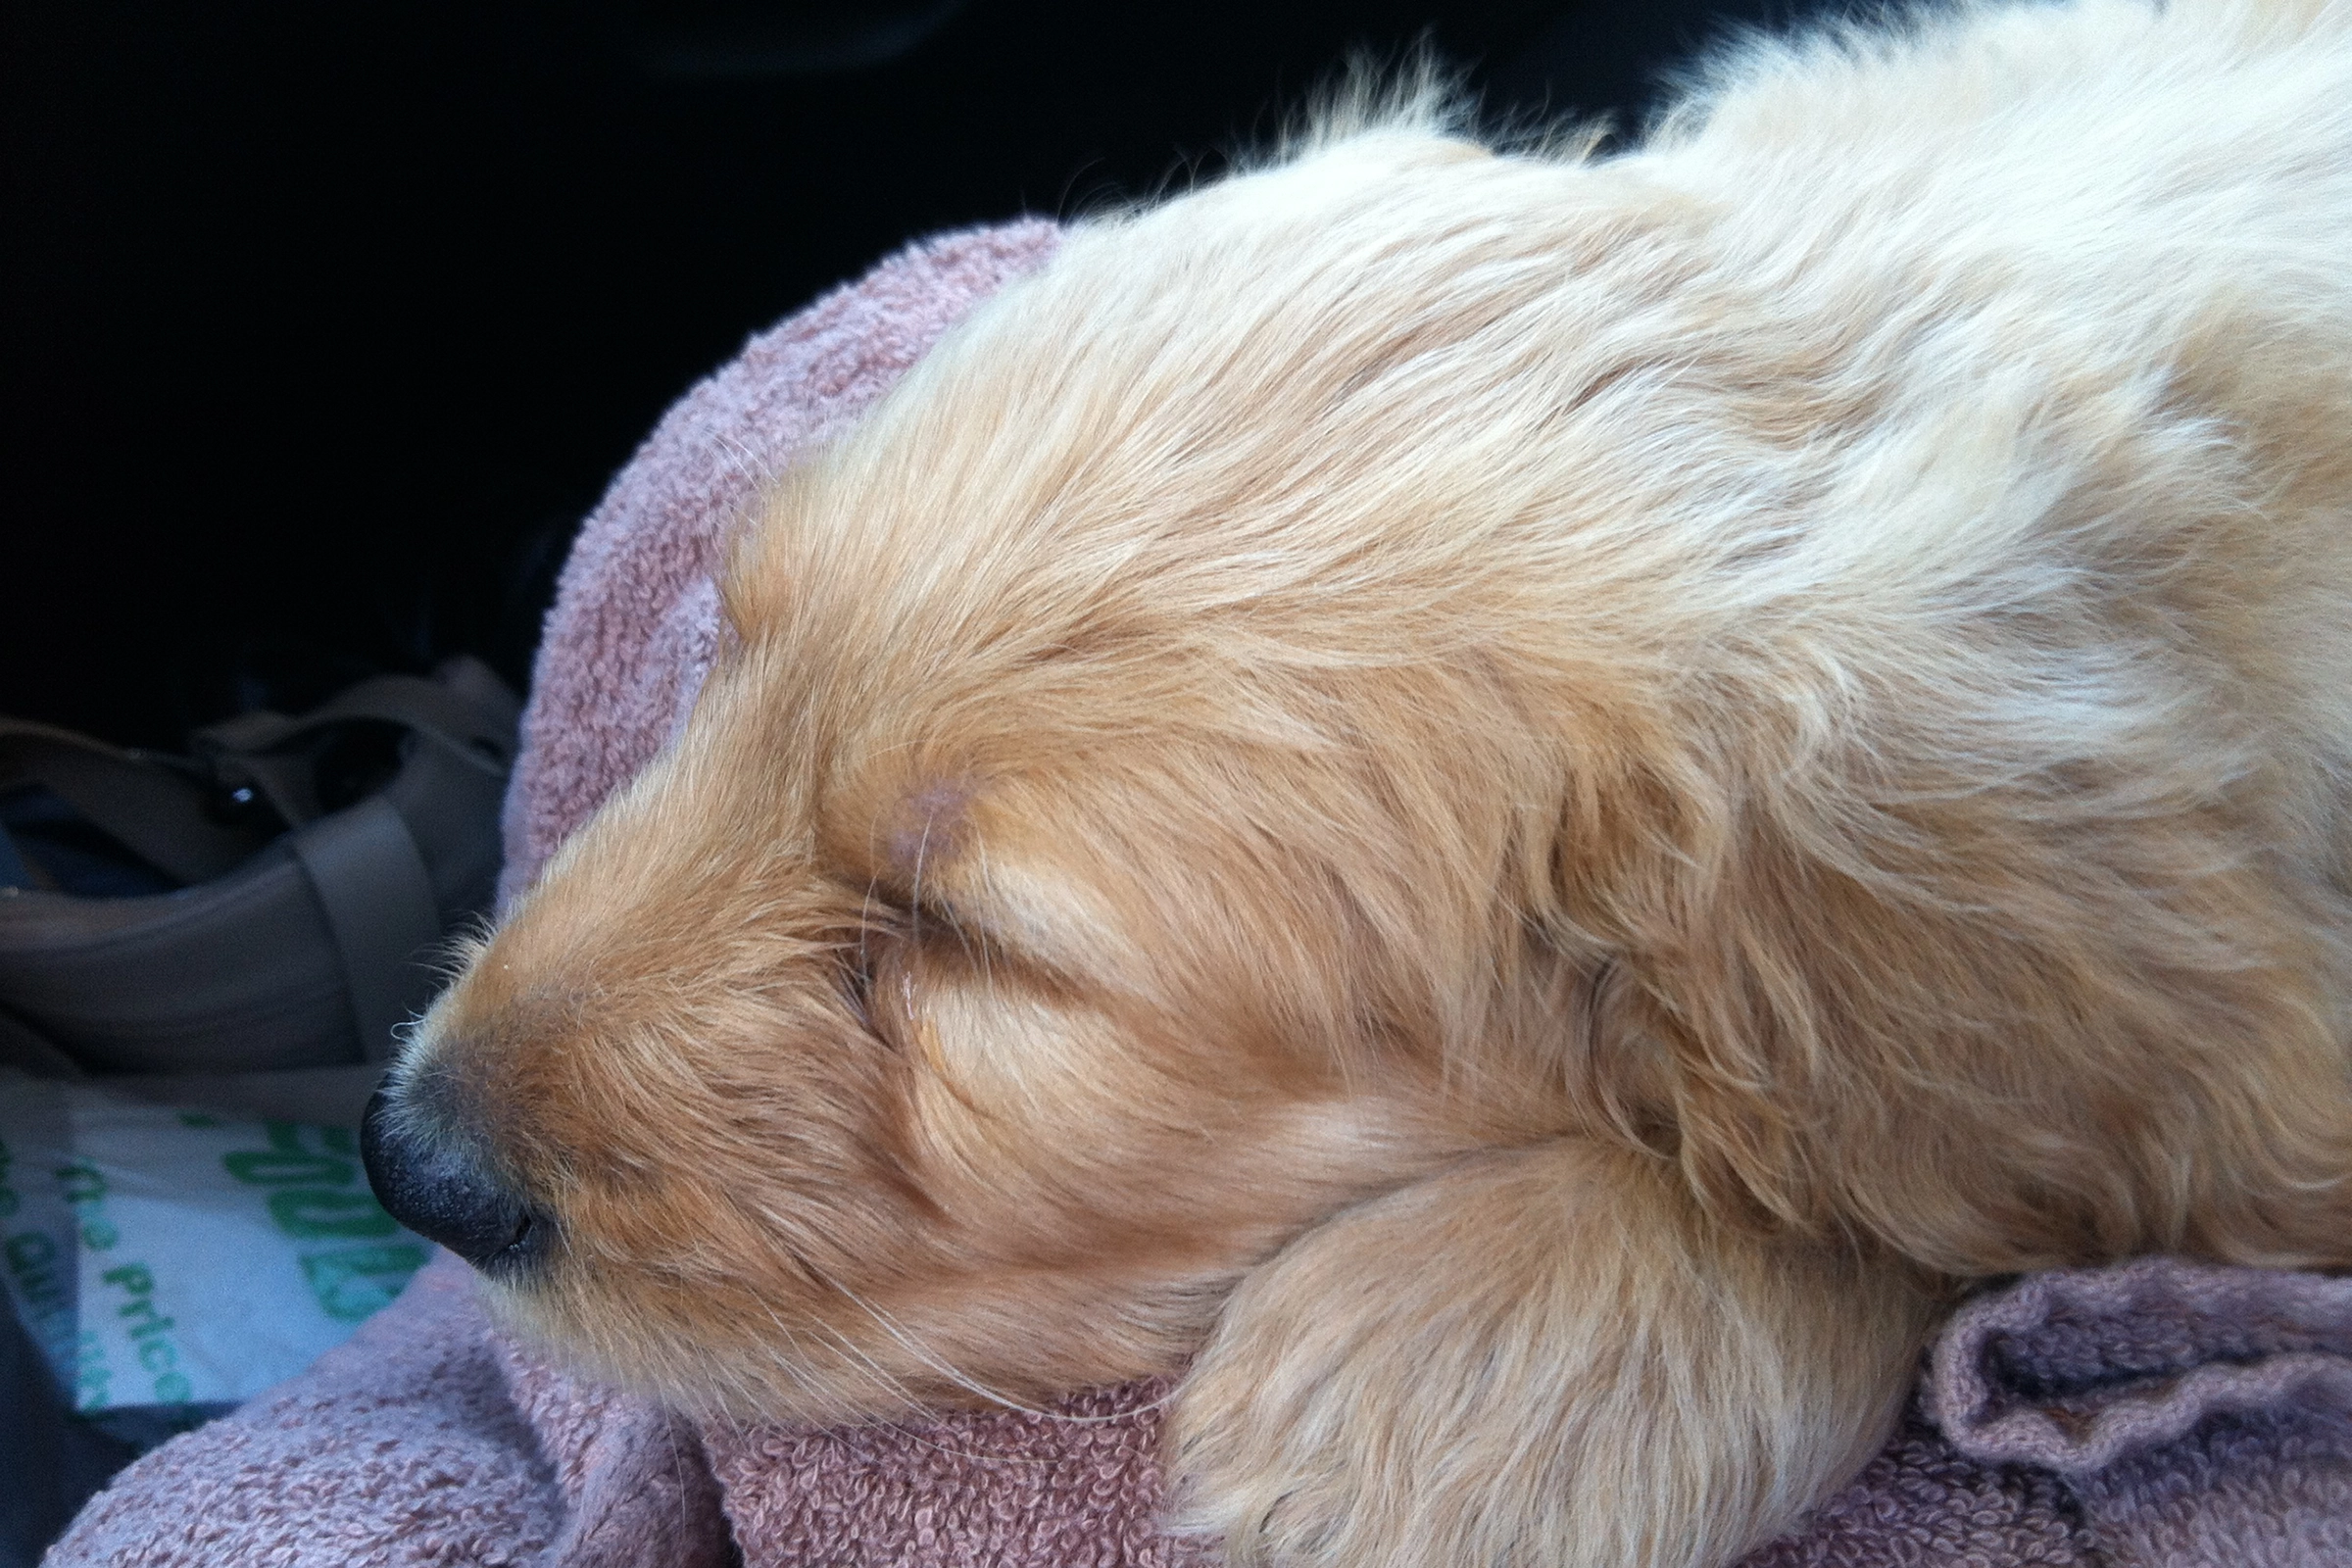 goldendoodle puppy face sleeping